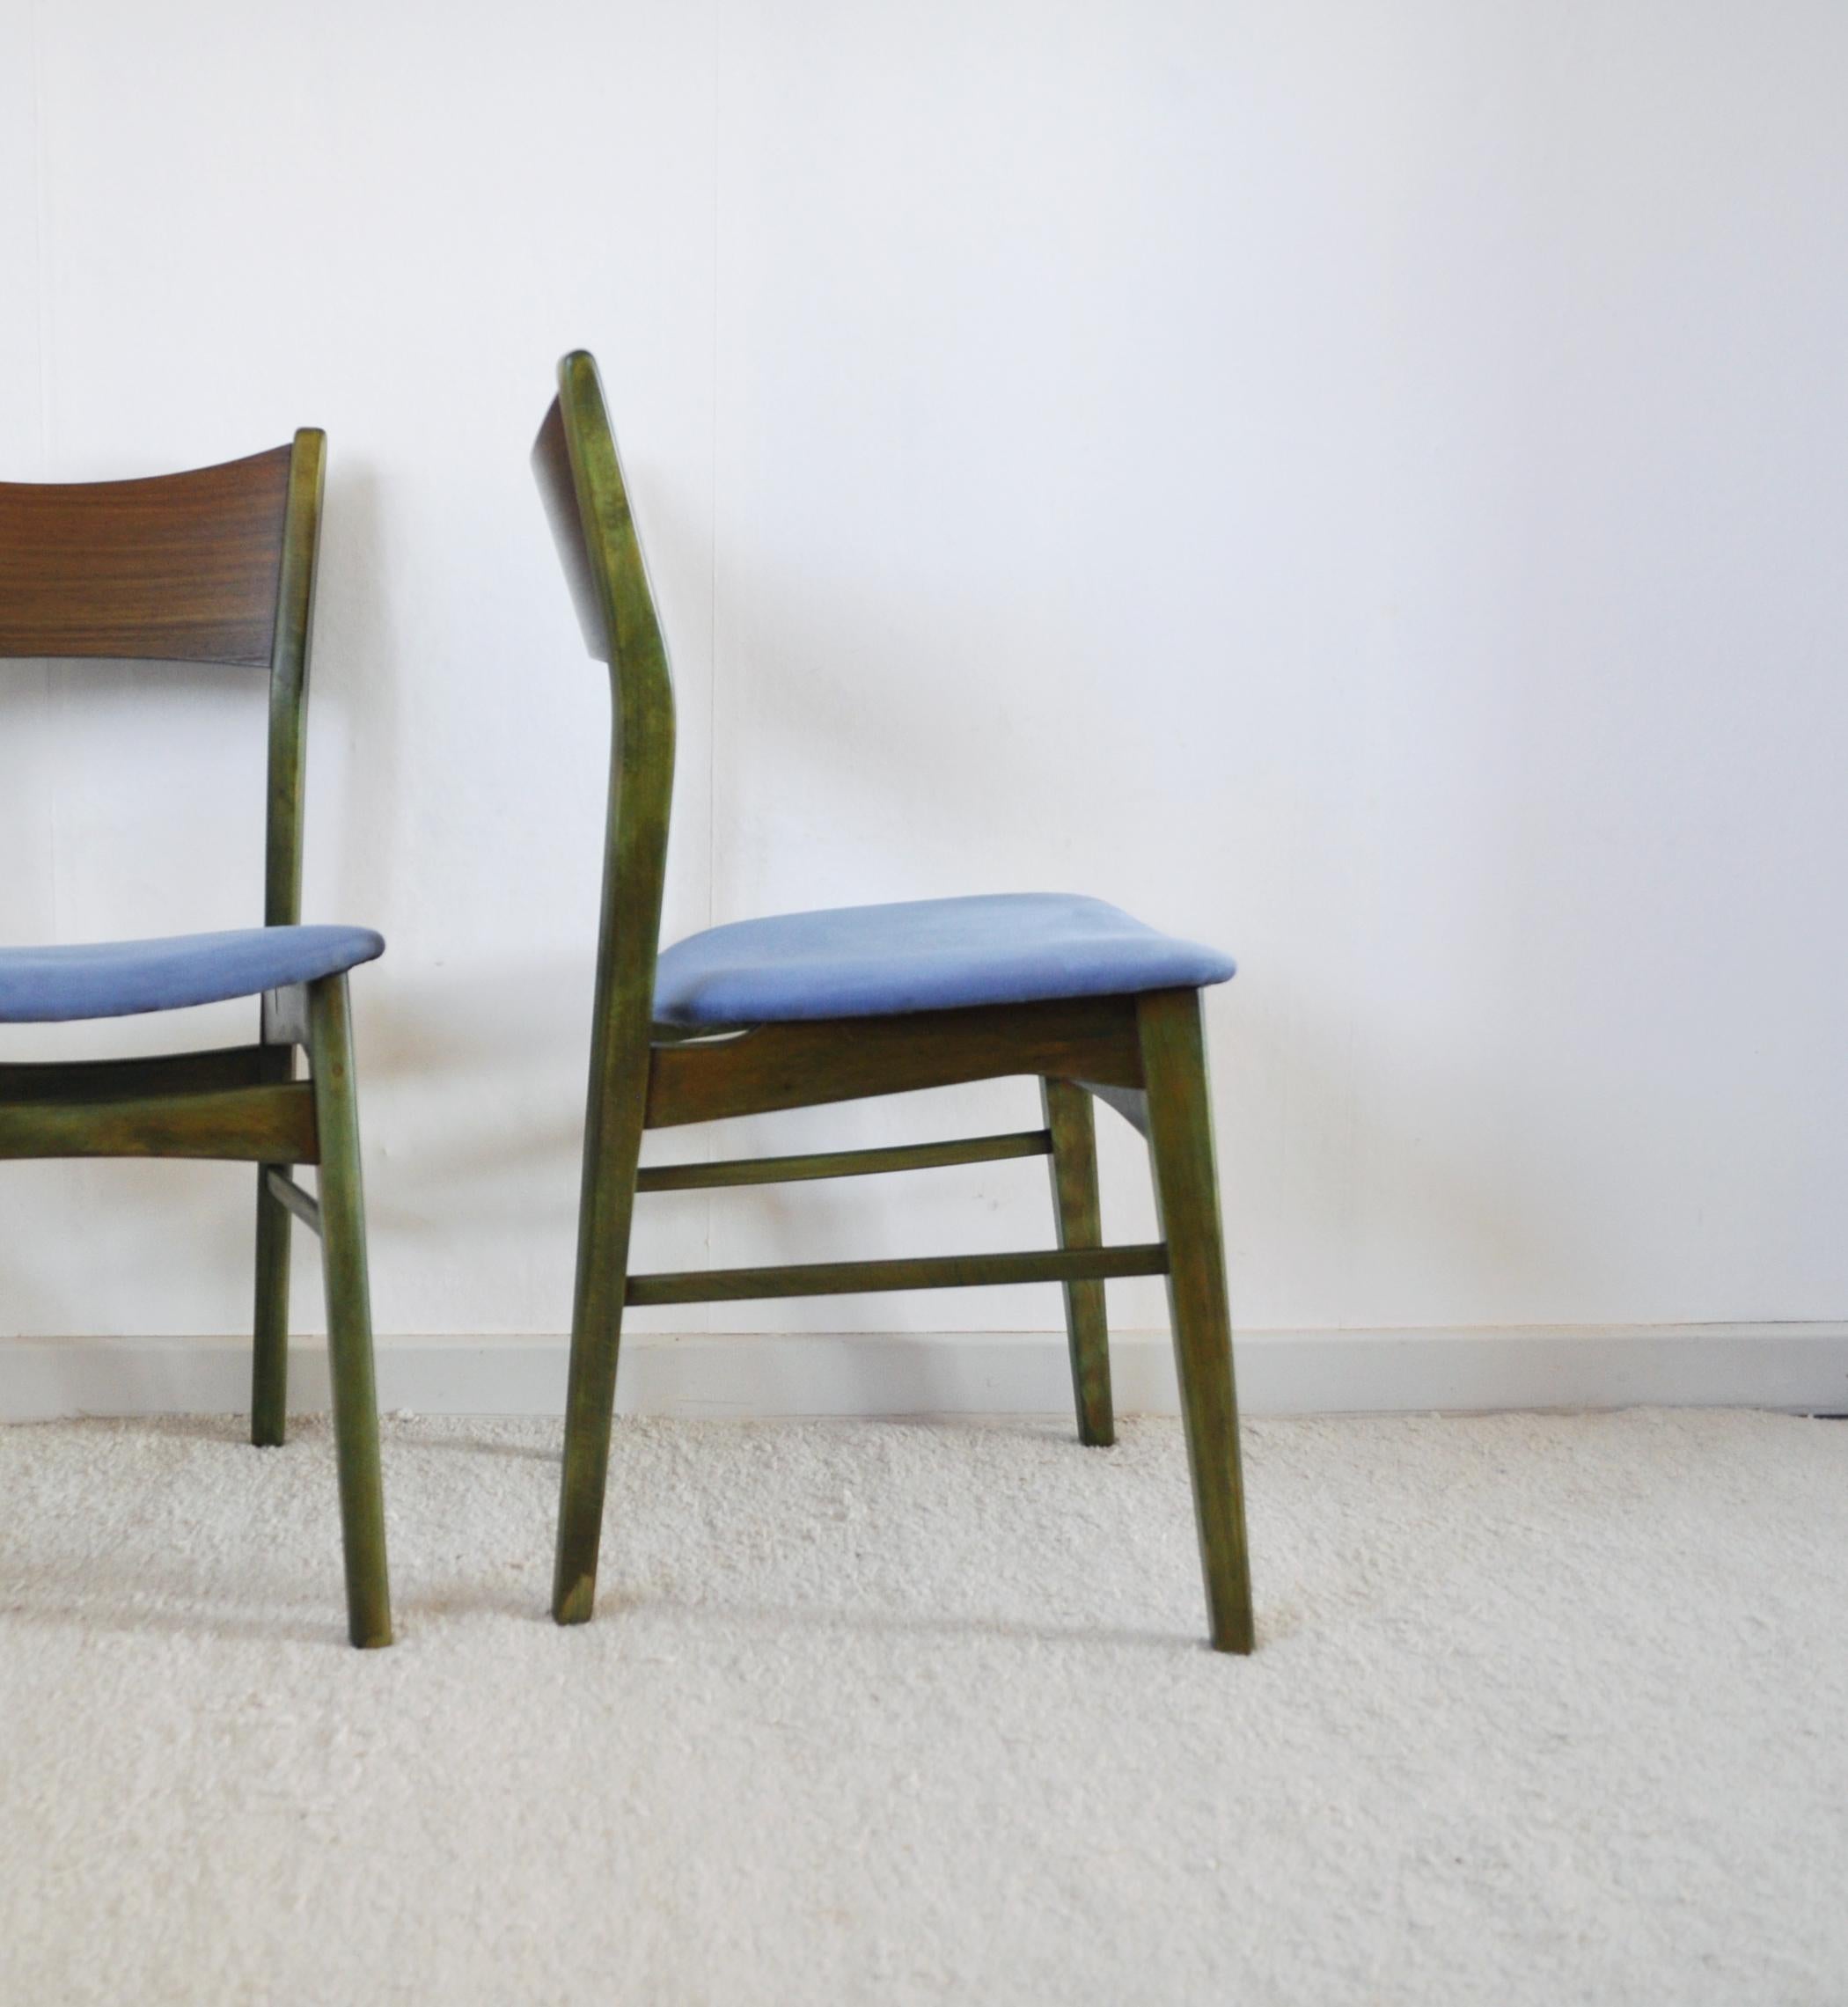 Danish Modern Dining Chair Stained in an Emerald Color, 1960s In Good Condition For Sale In Vordingborg, DK